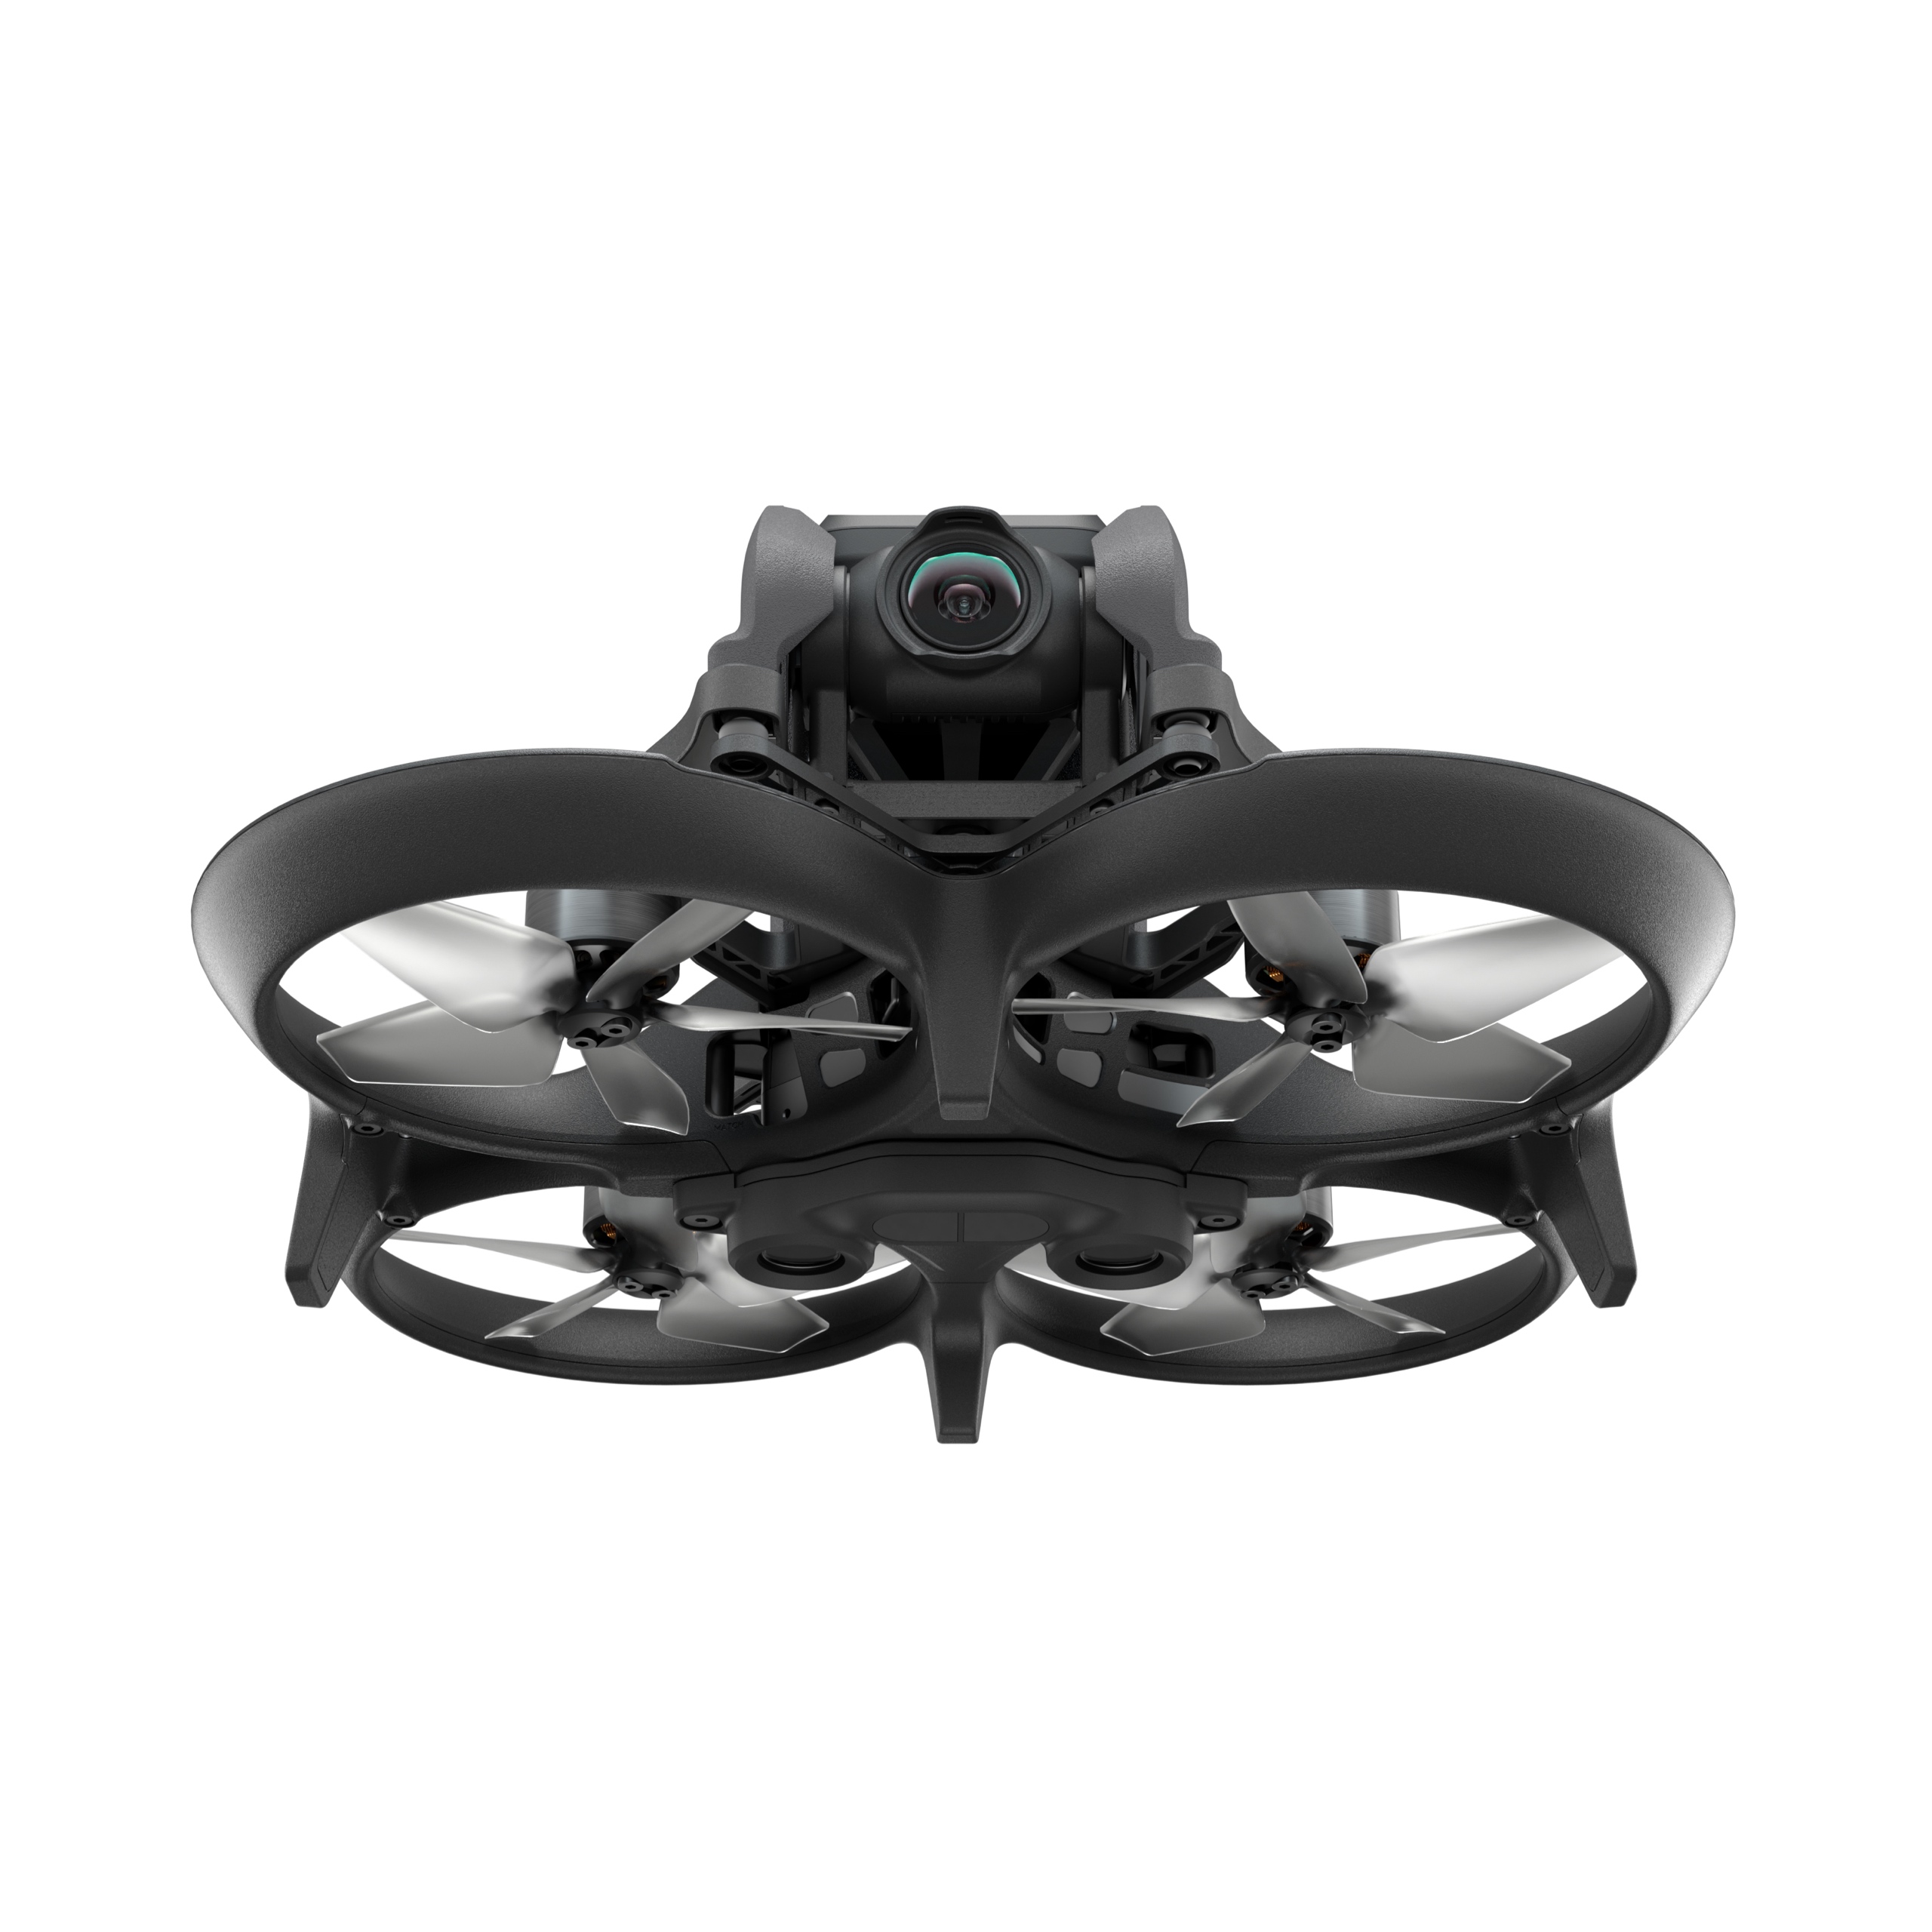 The new DJI Avata FPV drone is built for speed and agility but